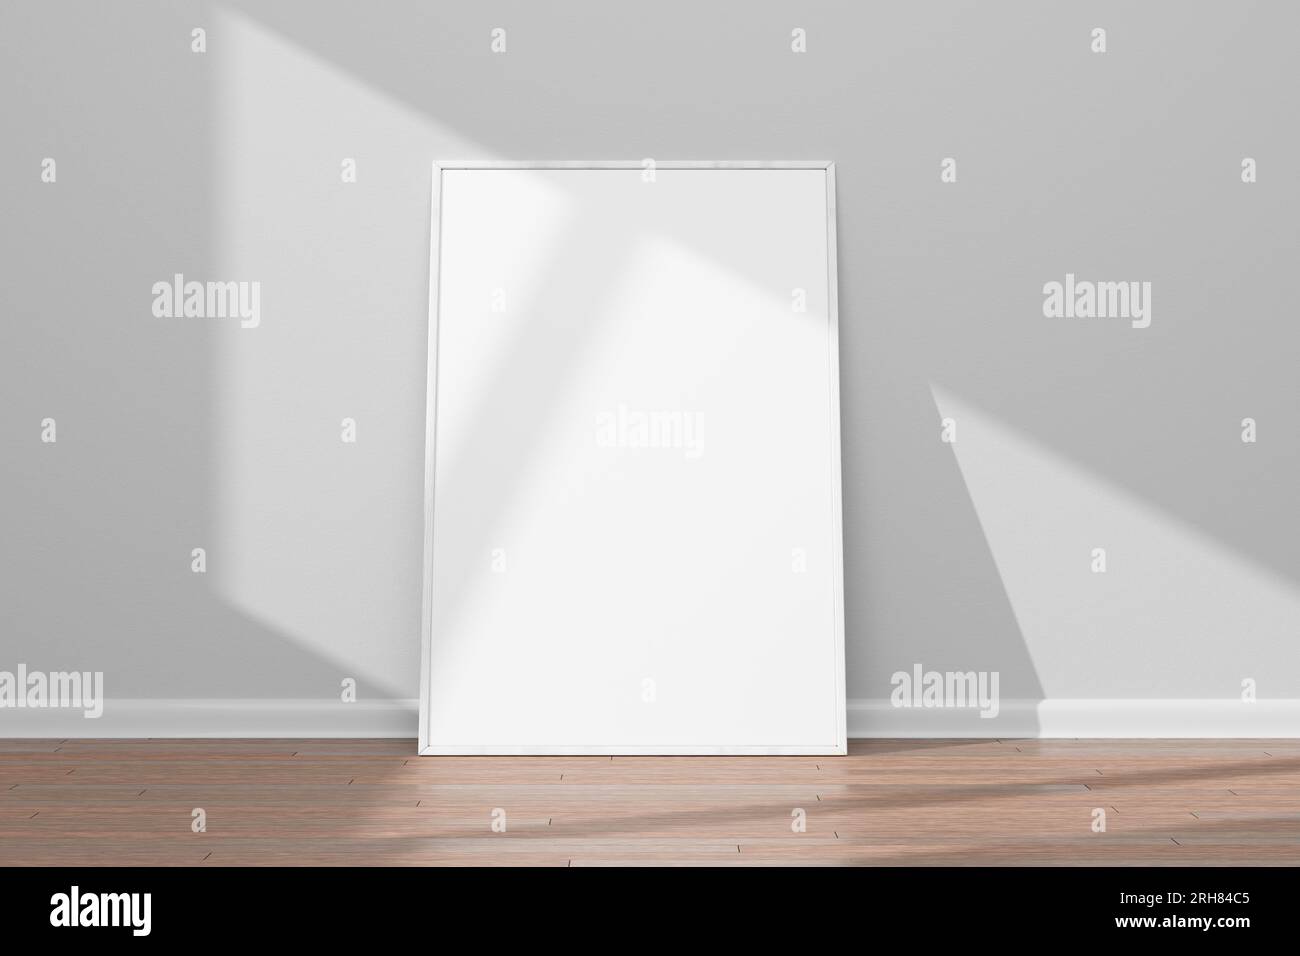 Design template for layout. Realistic, white wooden blank frame on a white wall and wooden floor. 3D rendering. Stock Photo